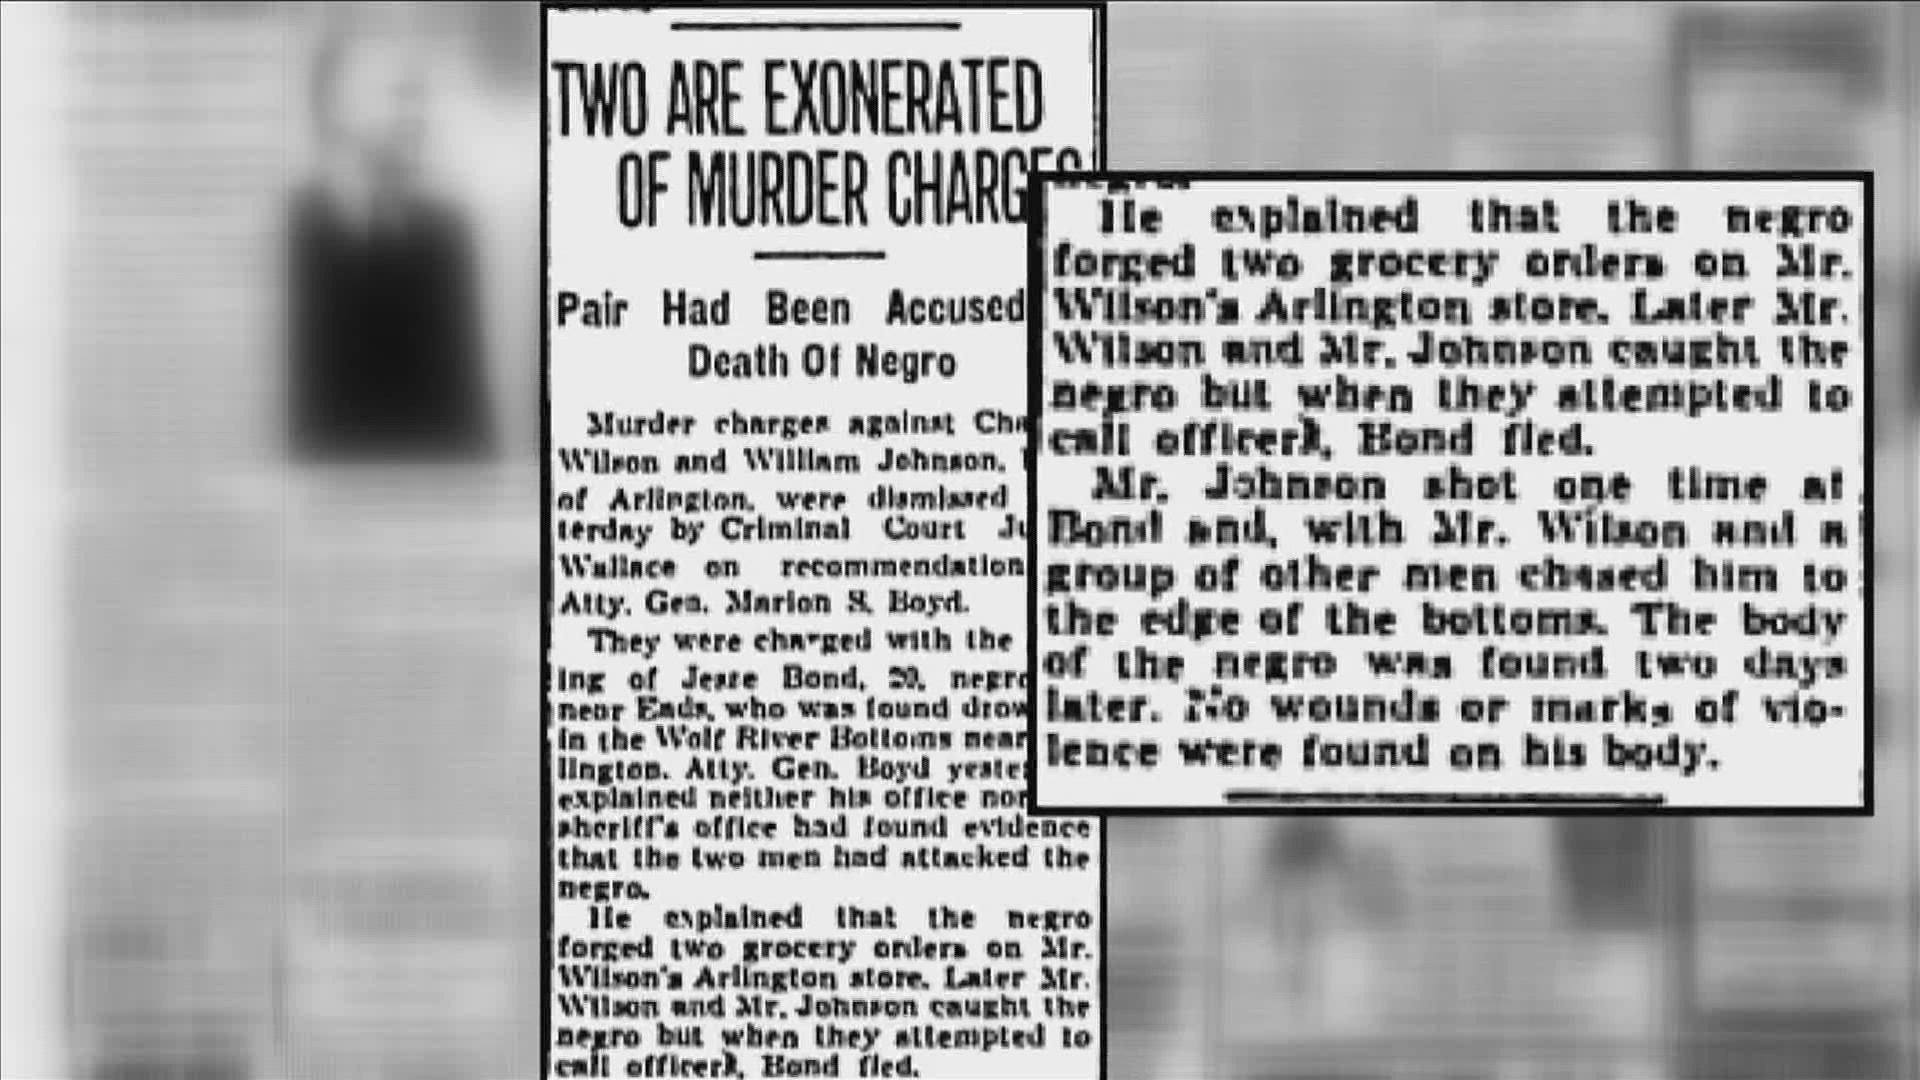 The Lynching Sites Project of Memphis and the family of Jesse Lee Bond are working to put up a historical marker at the site where two men lynched Bond in 1939.